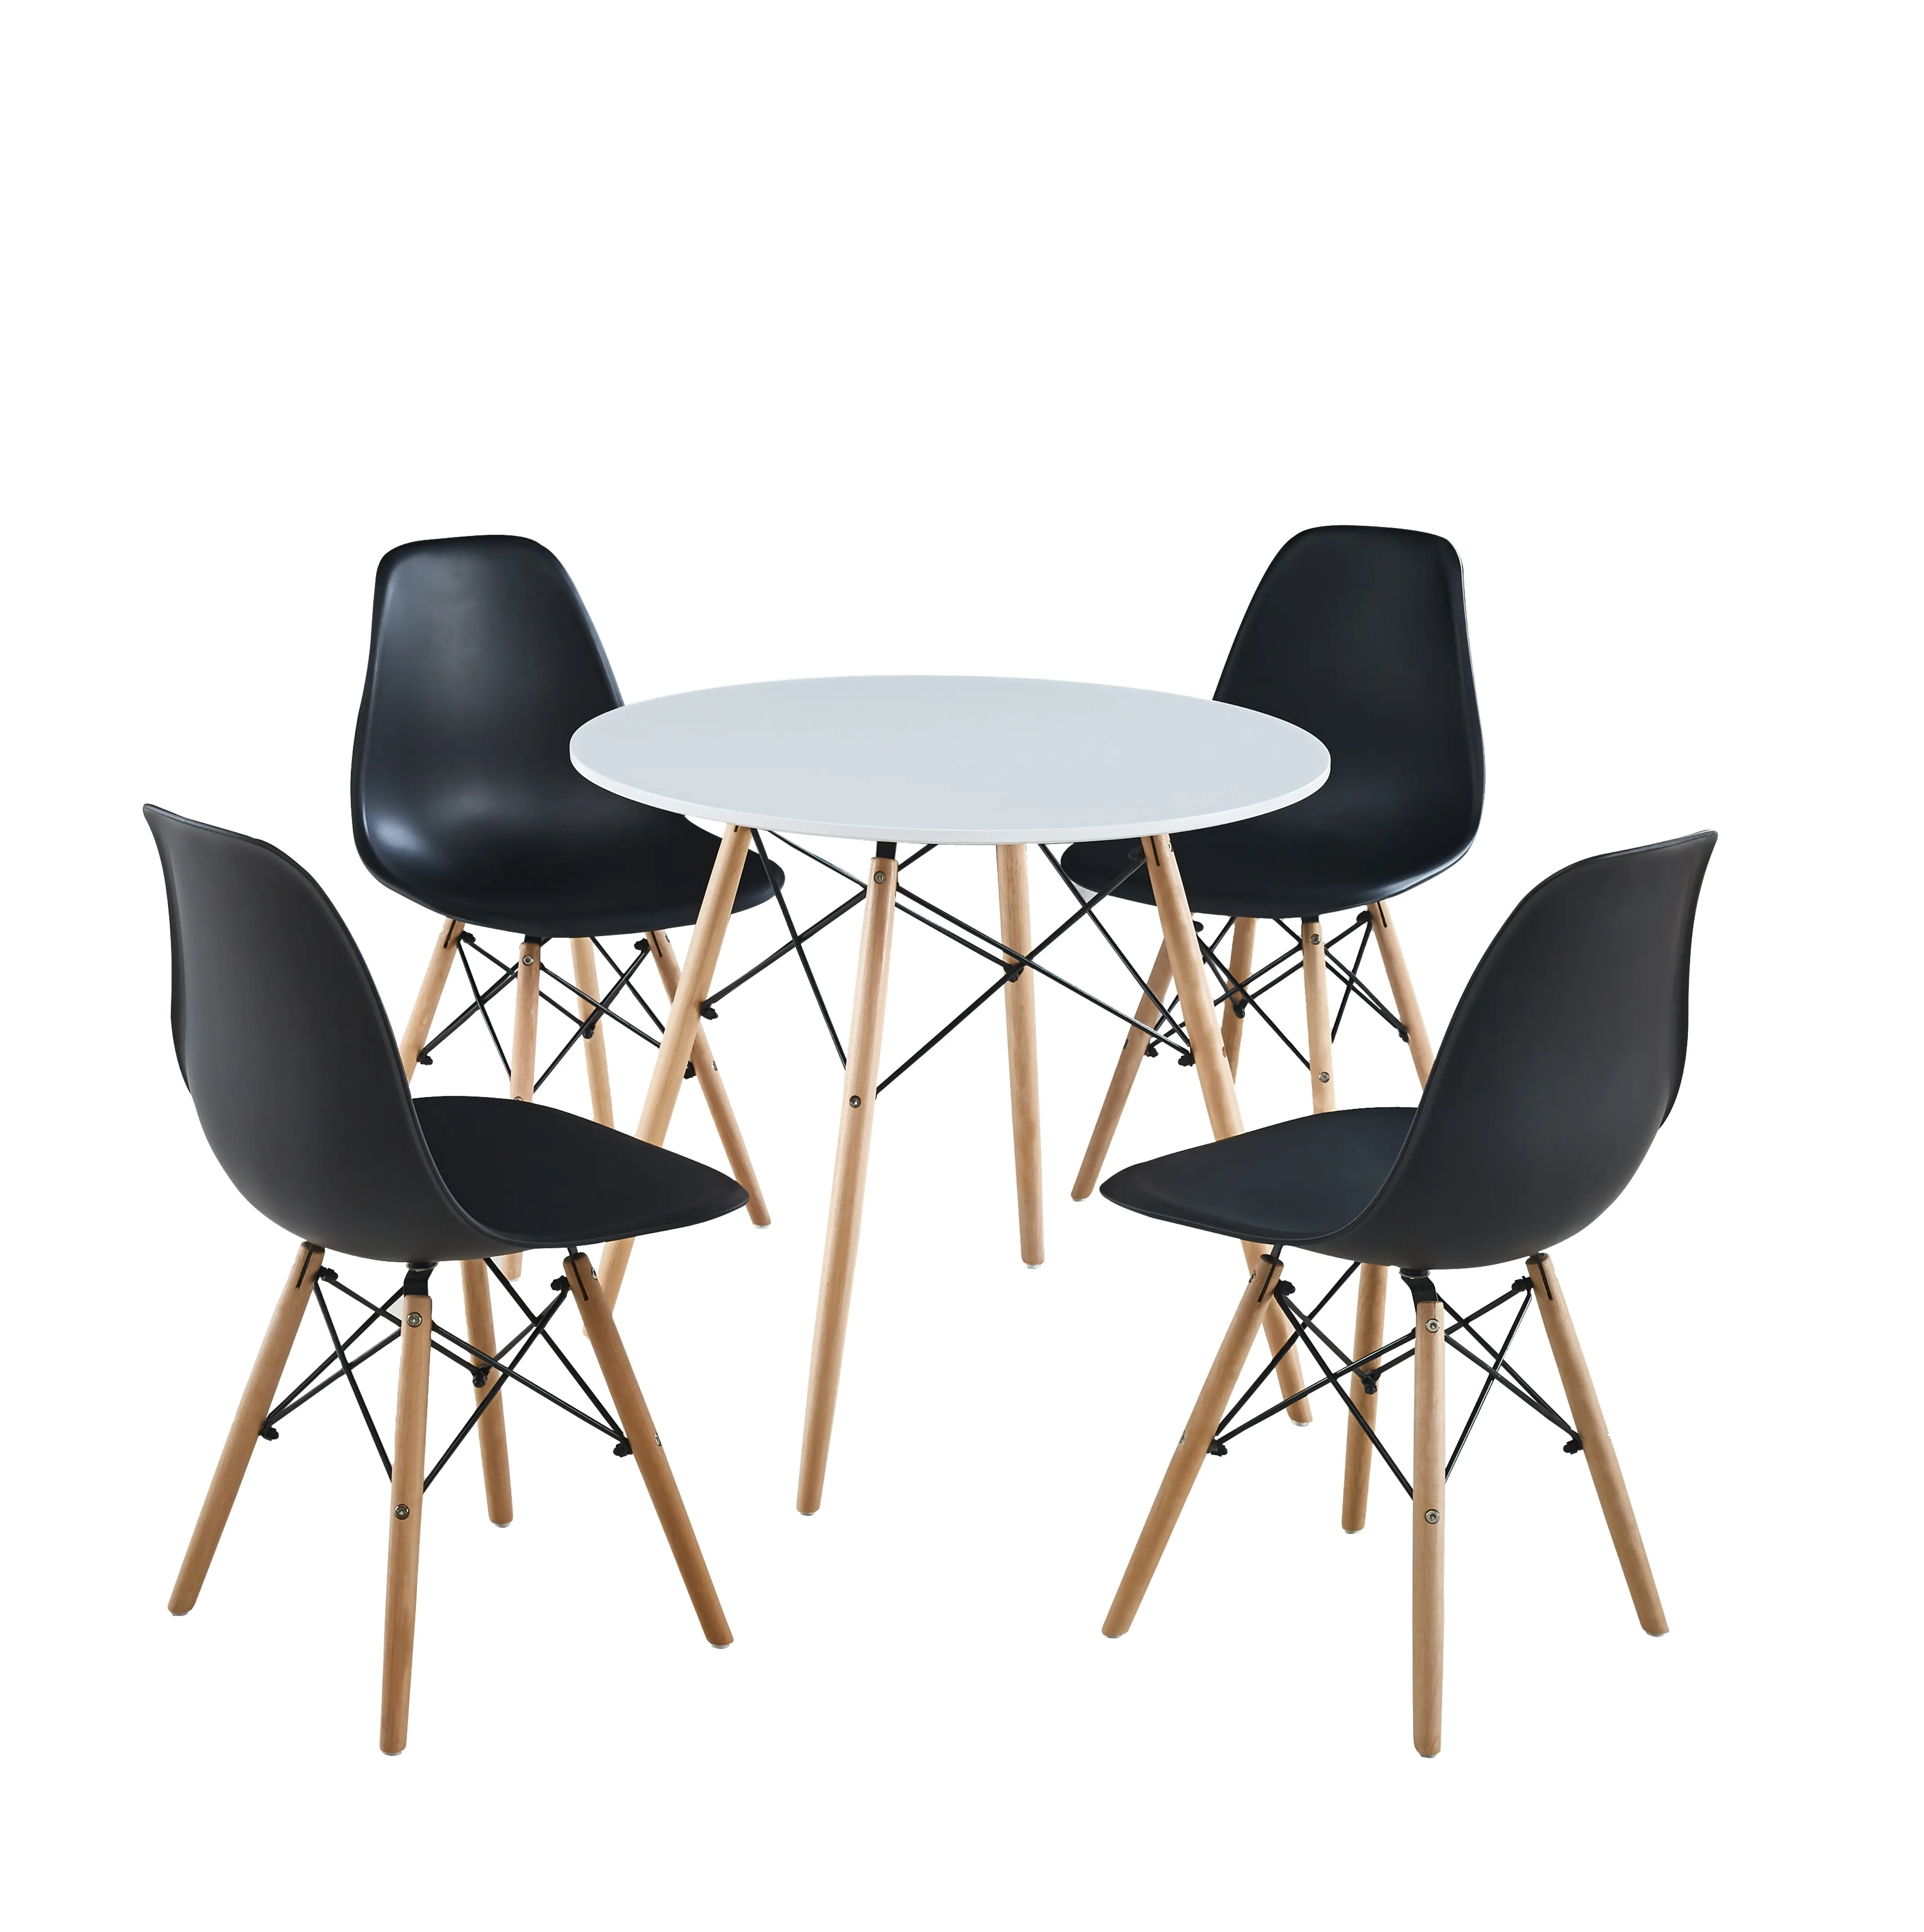 European Design Sand Blasted Black Finish Solid Mango Wood Round Dining Table For Dining Room And Hotel Furniture